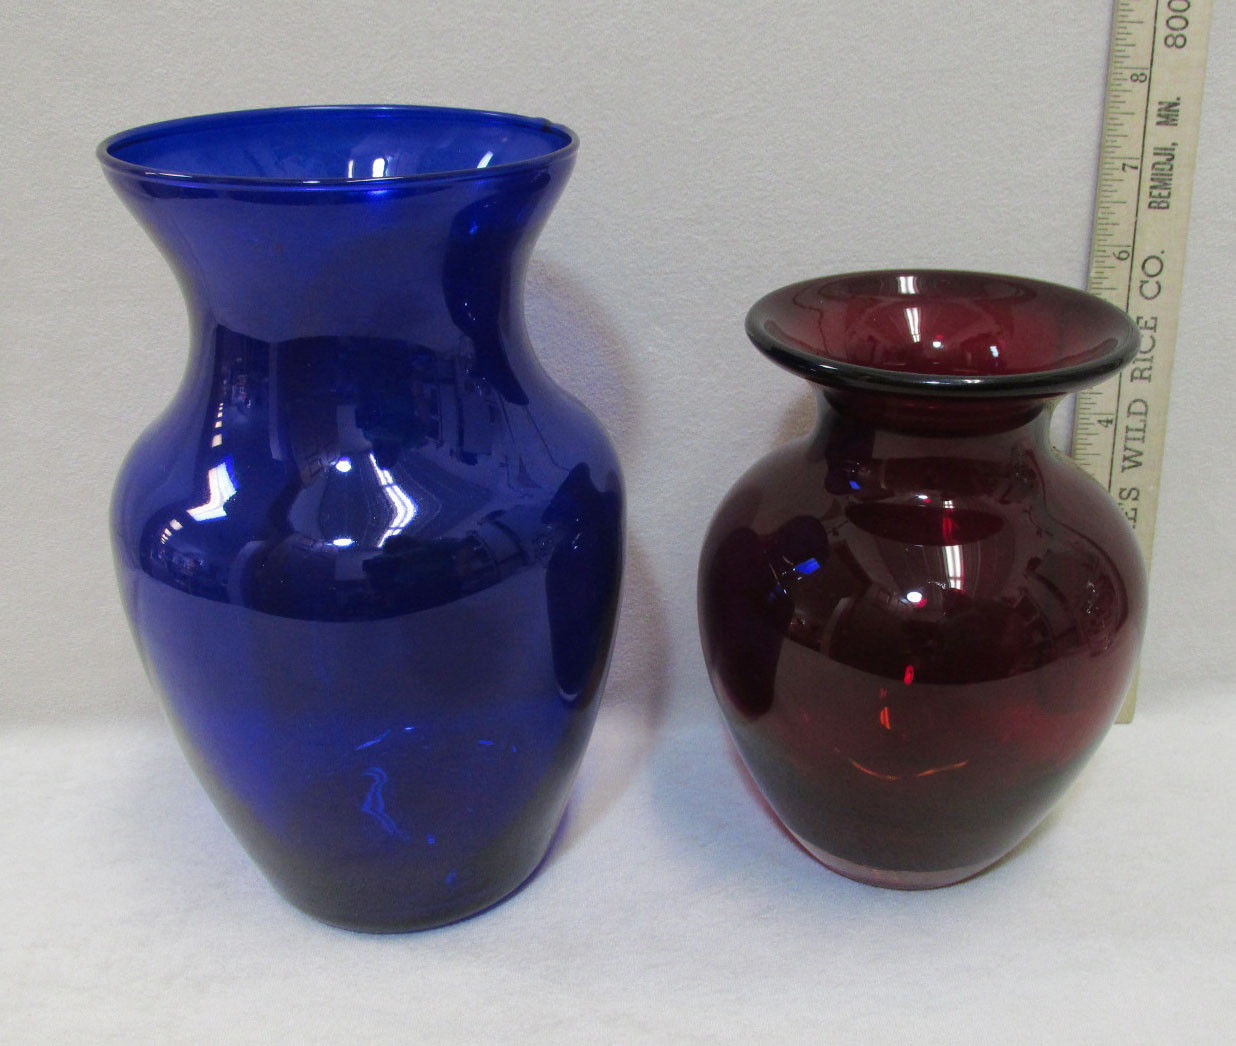 cobalt blue glass flower vases of clear blue vase stock living room cobalt blue vases new 4040cih with regard to clear blue vase photos lot 3 red clear blue glass vases patriotic and 49 similar items